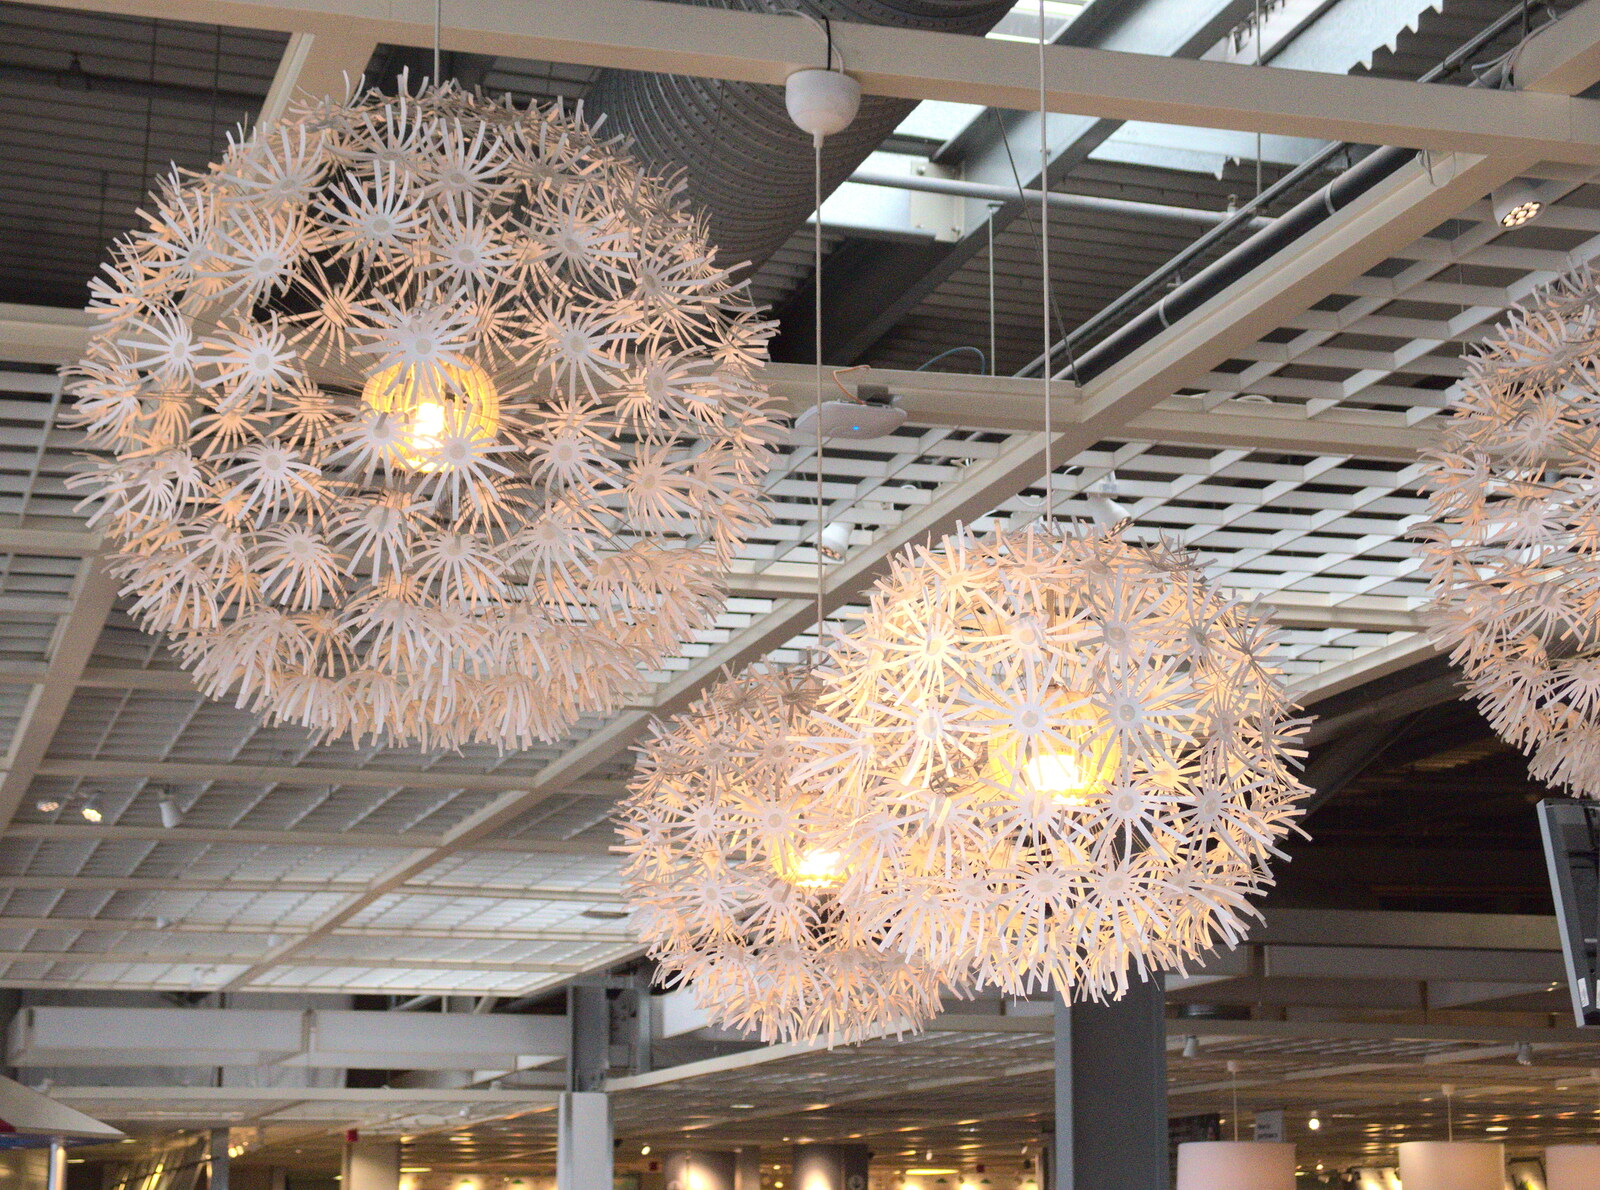 Funky lights in the Ikea café from New Railway and a Trip to Ikea, Ipswich and Thurrock - 19th September 2014